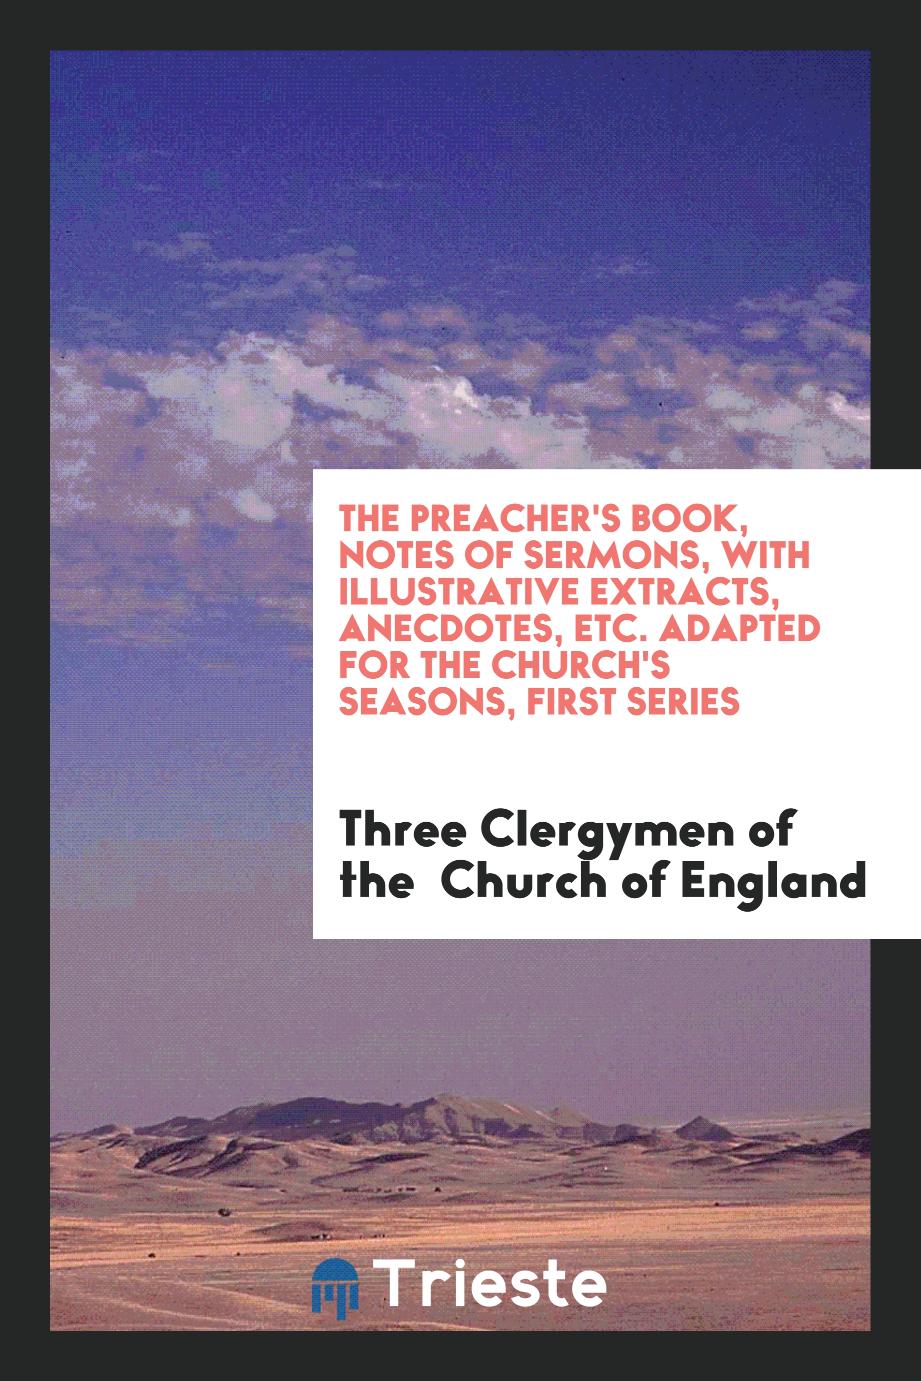 The Preacher's Book, Notes of Sermons, with Illustrative Extracts, Anecdotes, Etc. Adapted for the Church's Seasons, First Series